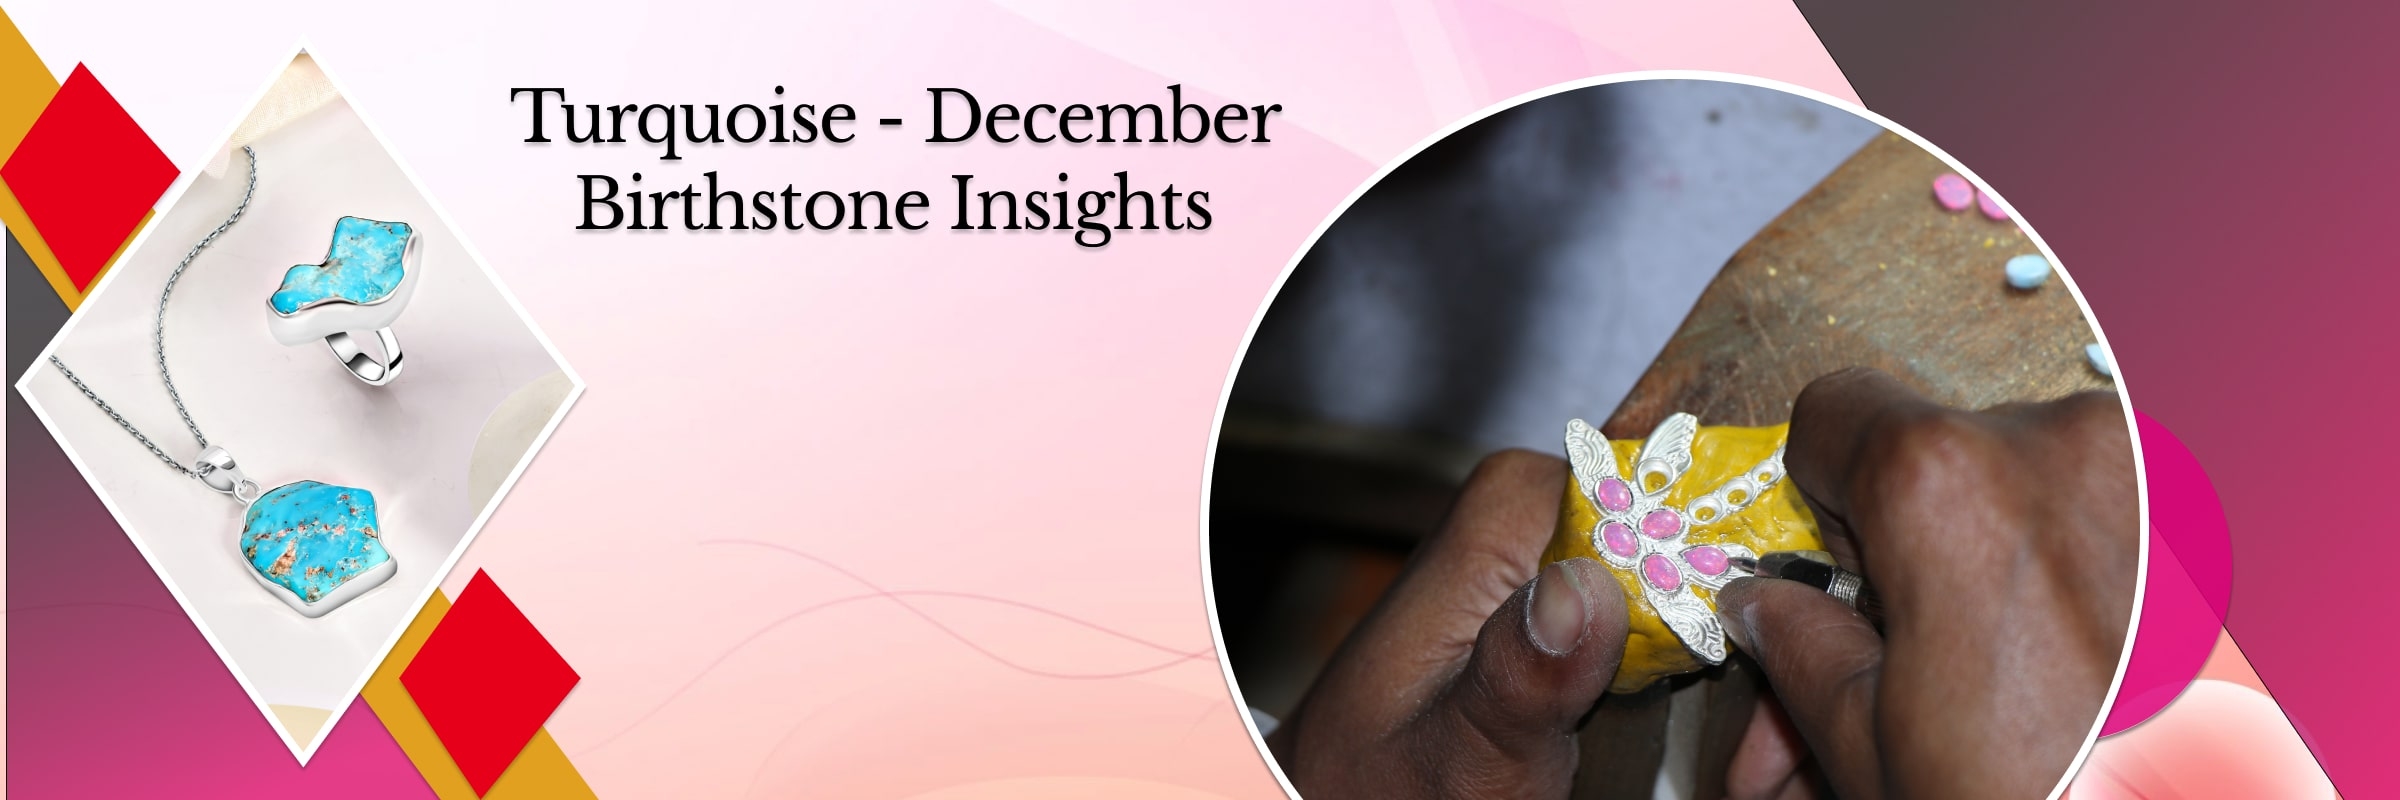 Significance of December Birthstones